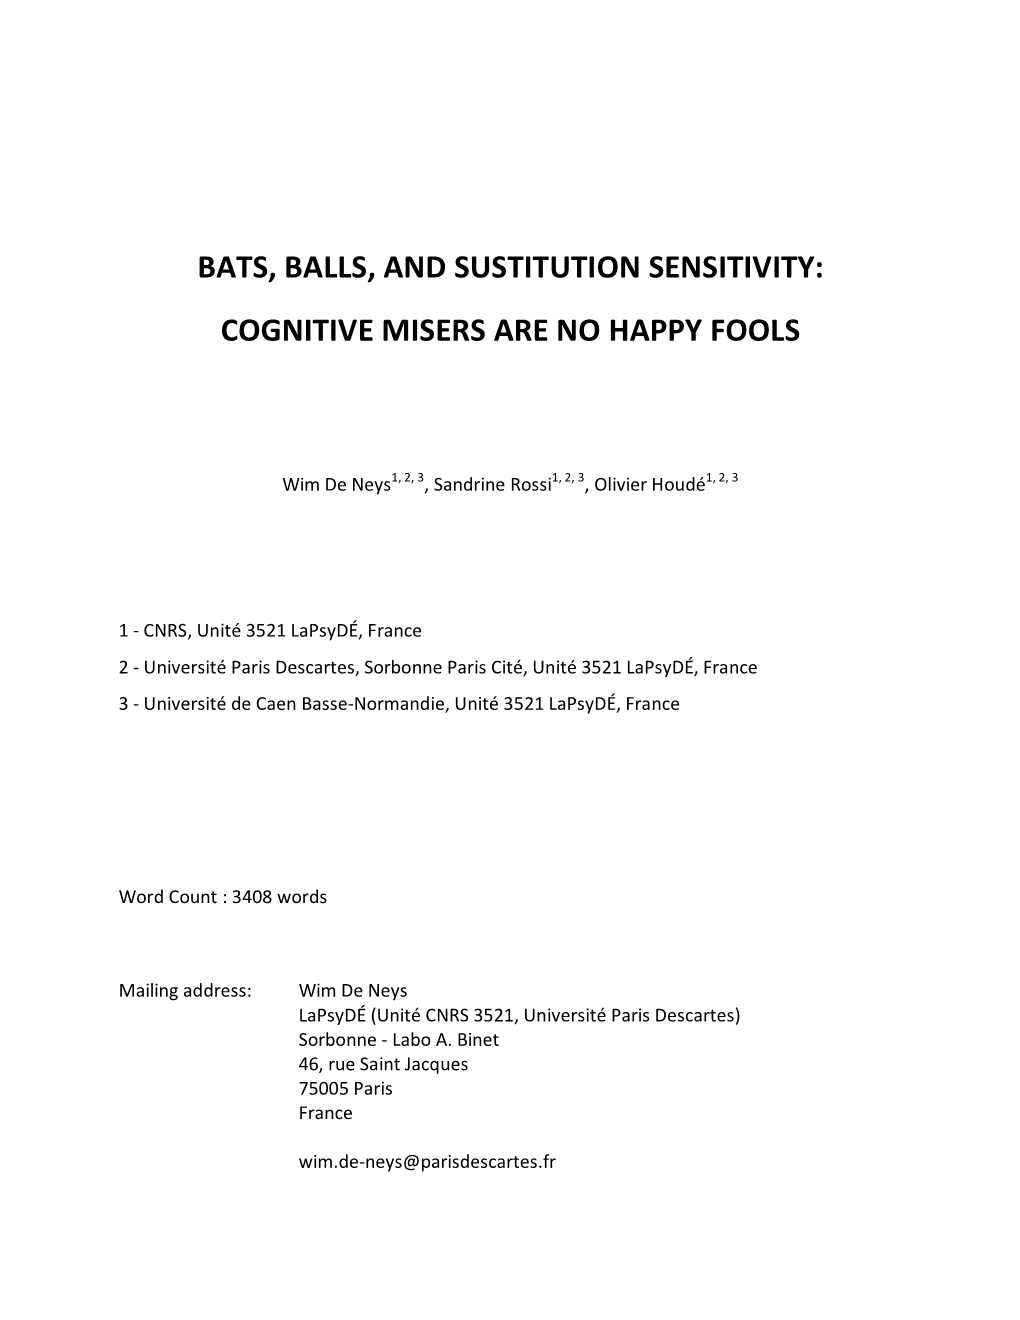 Bats, Balls, and Sustitution Sensitivity: Cognitive Misers Are No Happy Fools